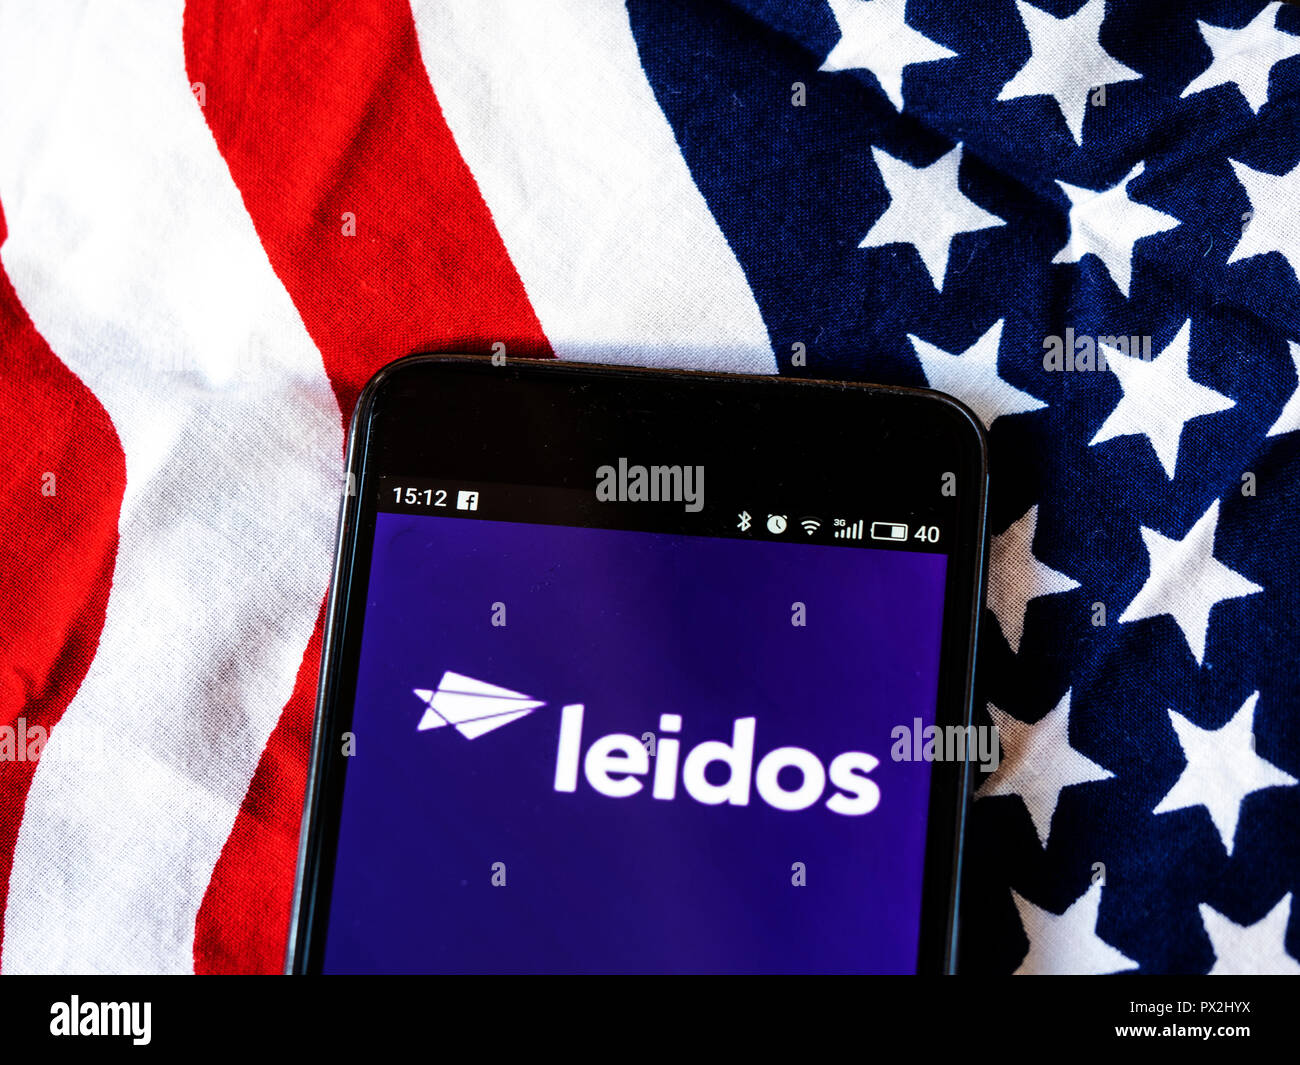 Leidos Scientific research company logo seen displayed on smart phone. Leidos, formerly known as Science Applications International Corporation, is an American defense, aviation, information technology, and biomedical research company,  that provides scientific, engineering, systems integration, and technical services. Stock Photo